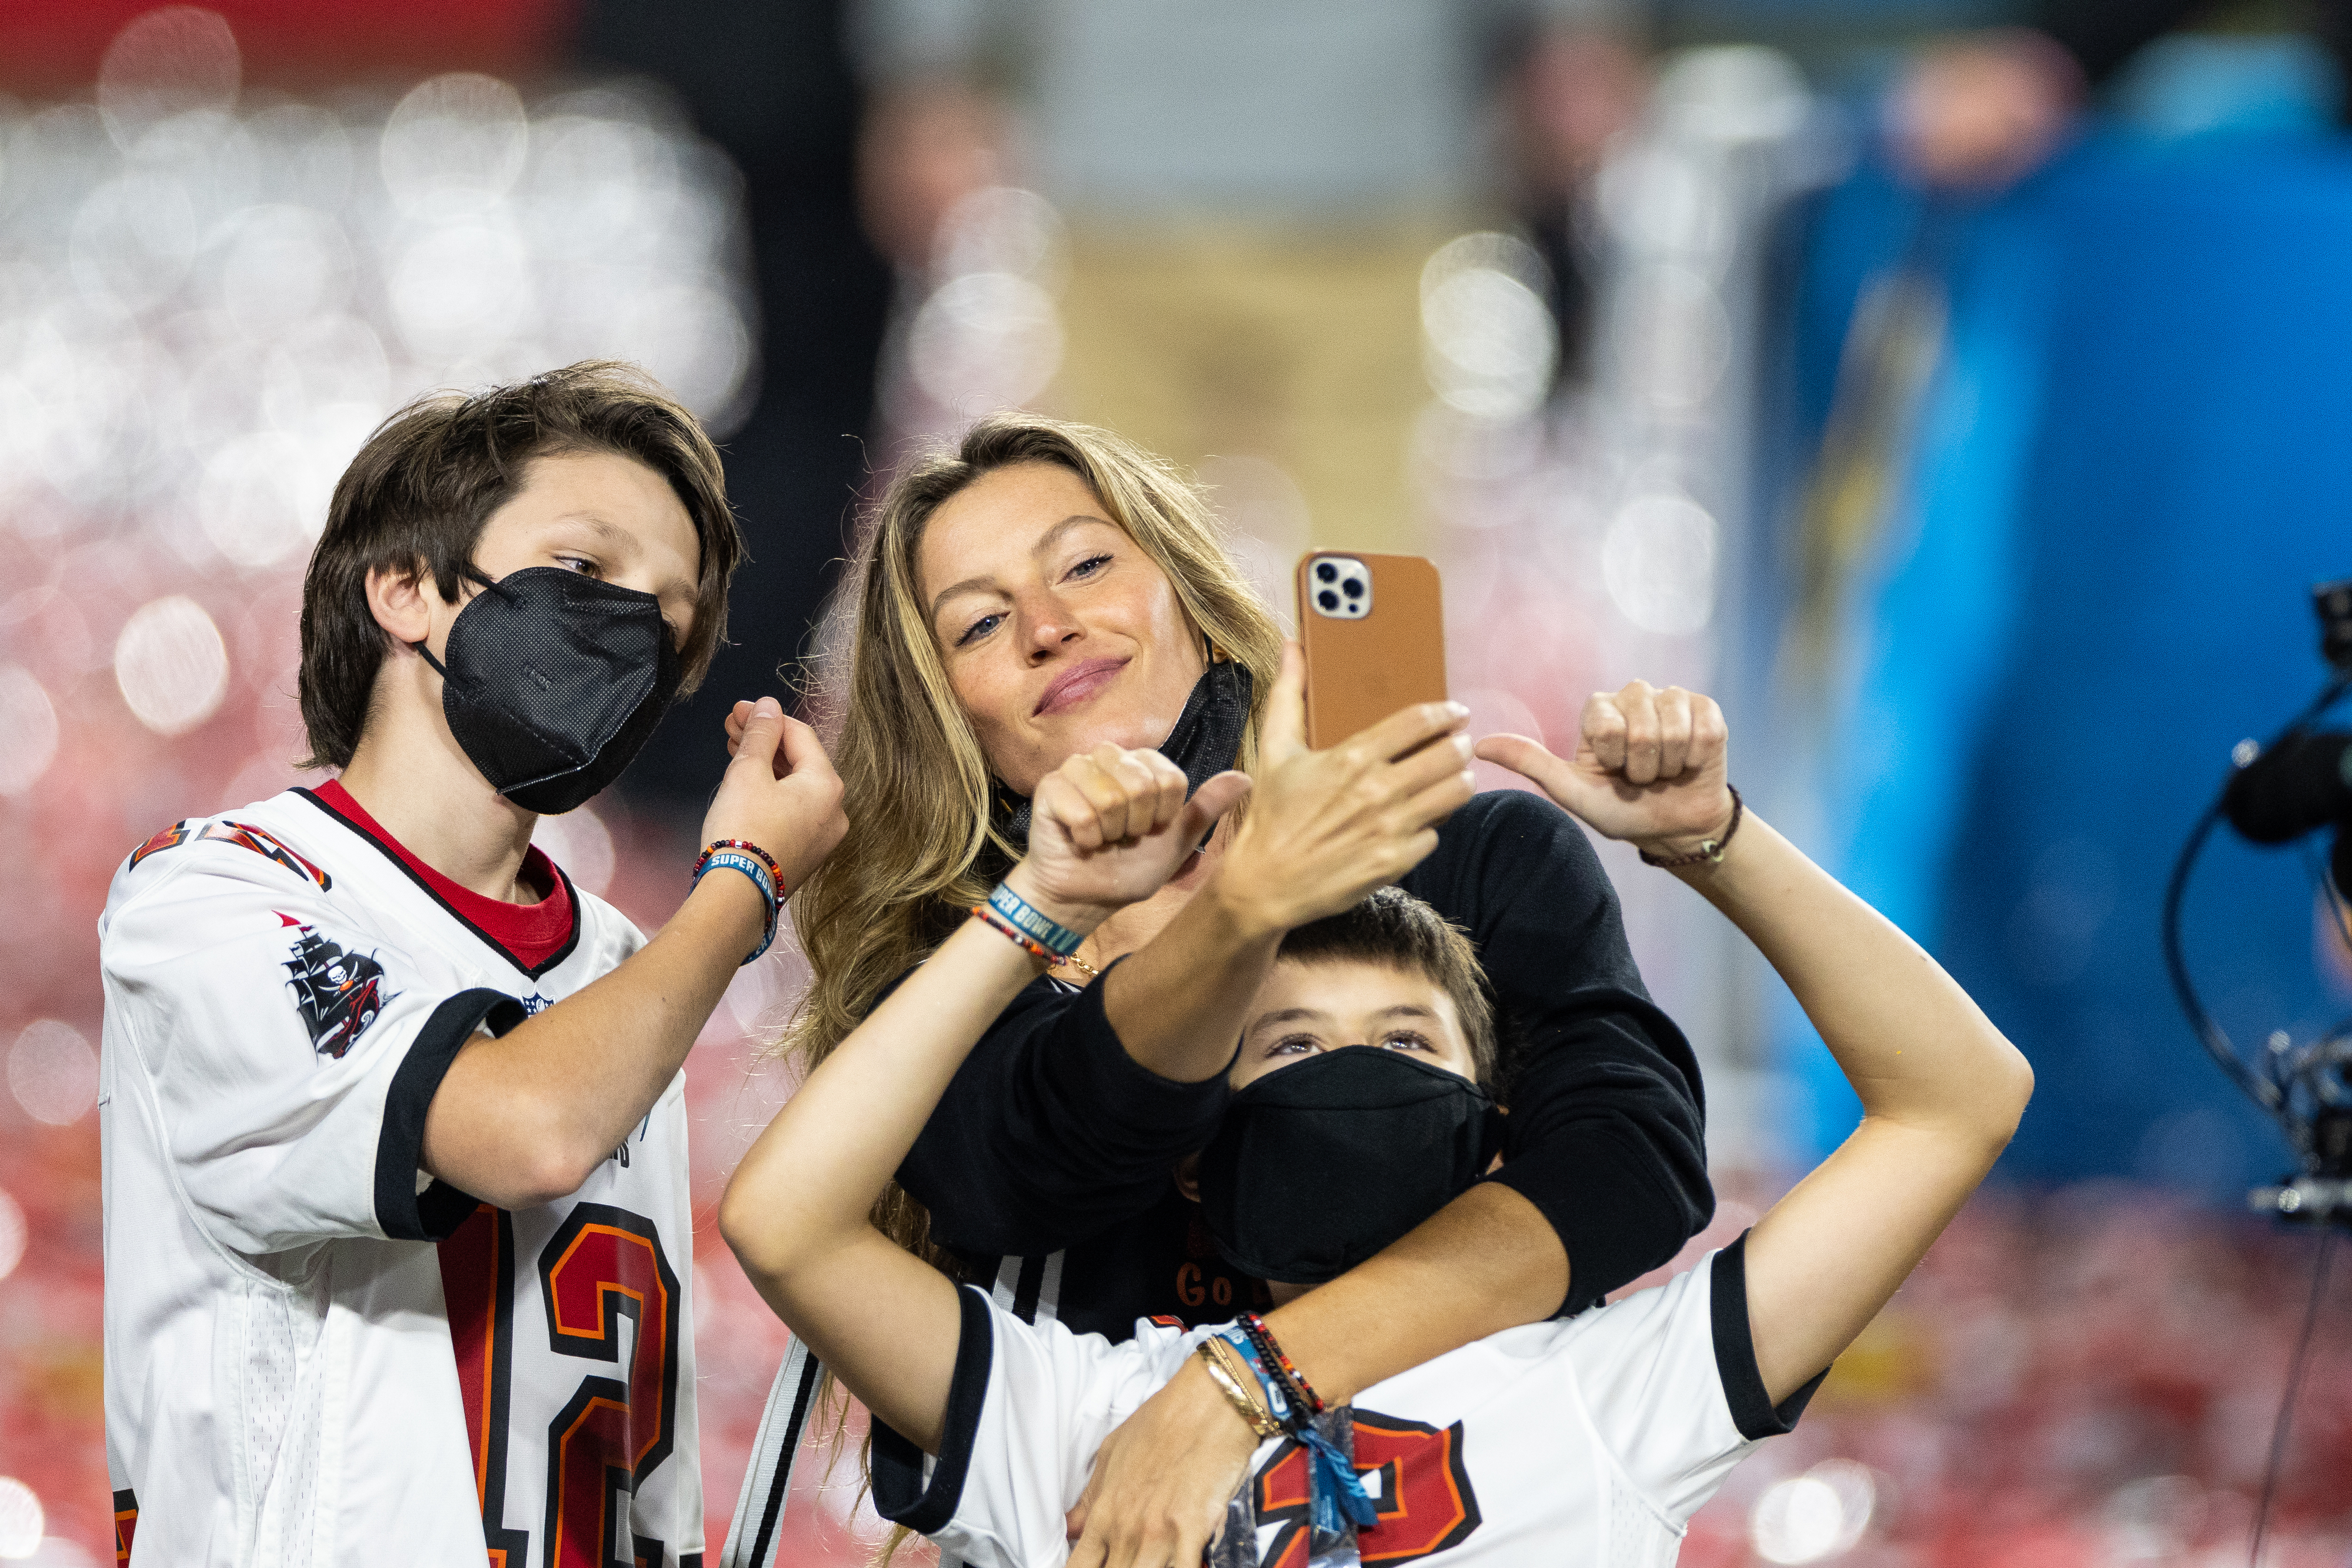 Gisele taking a selfie with Jack on the football field